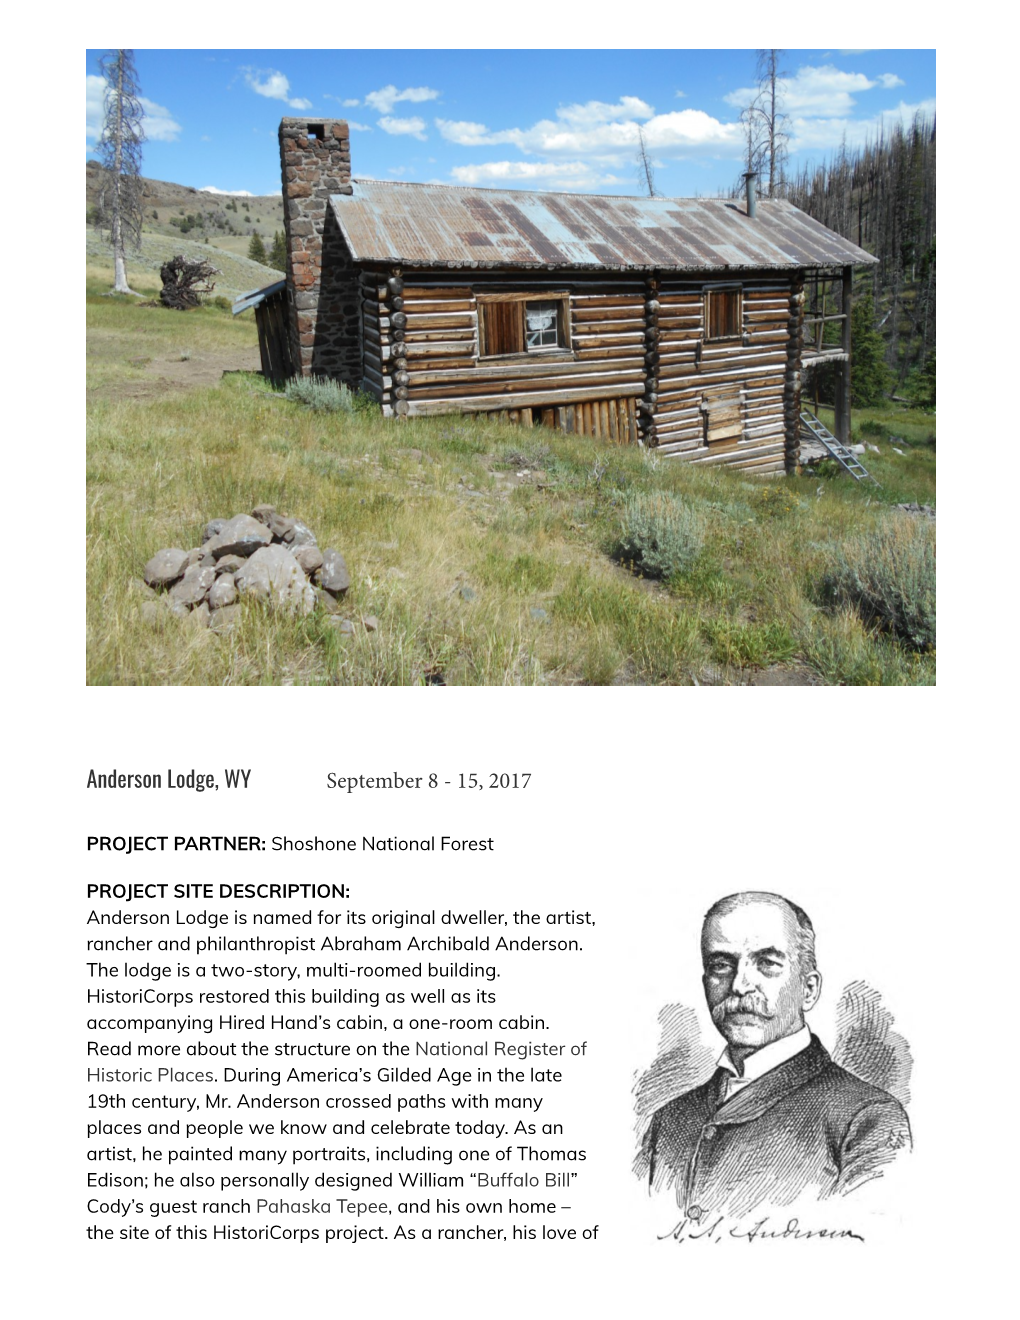 Anderson Lodge, WY September 8 - 15, 2017